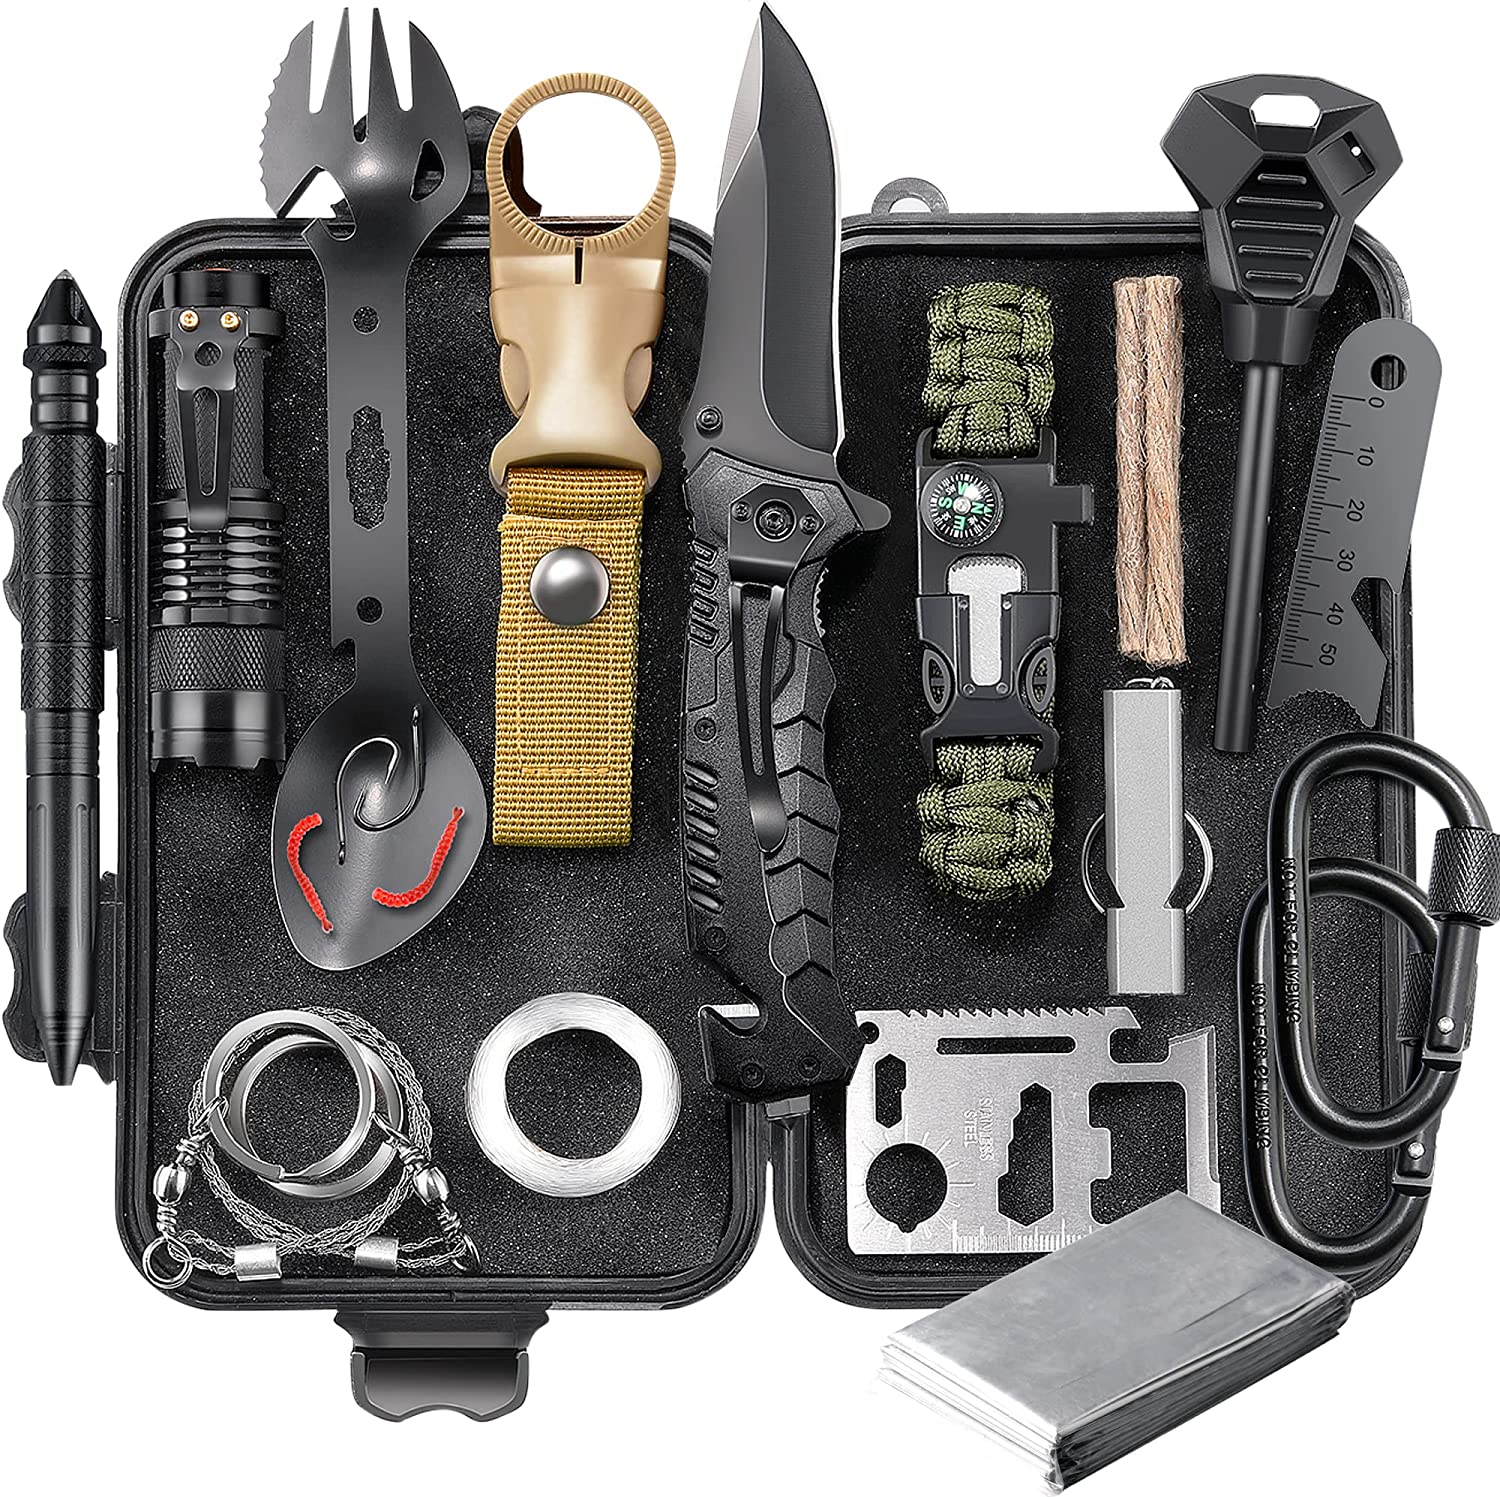 EILIKS Survival Gear, Emergency Survival Kit and Equipment 24 in 1, Cool Top Gadgets Gifts for Men Women Valentines Birthday Fathers Day, Christmas Stocking Stuffers, Camping Accessories